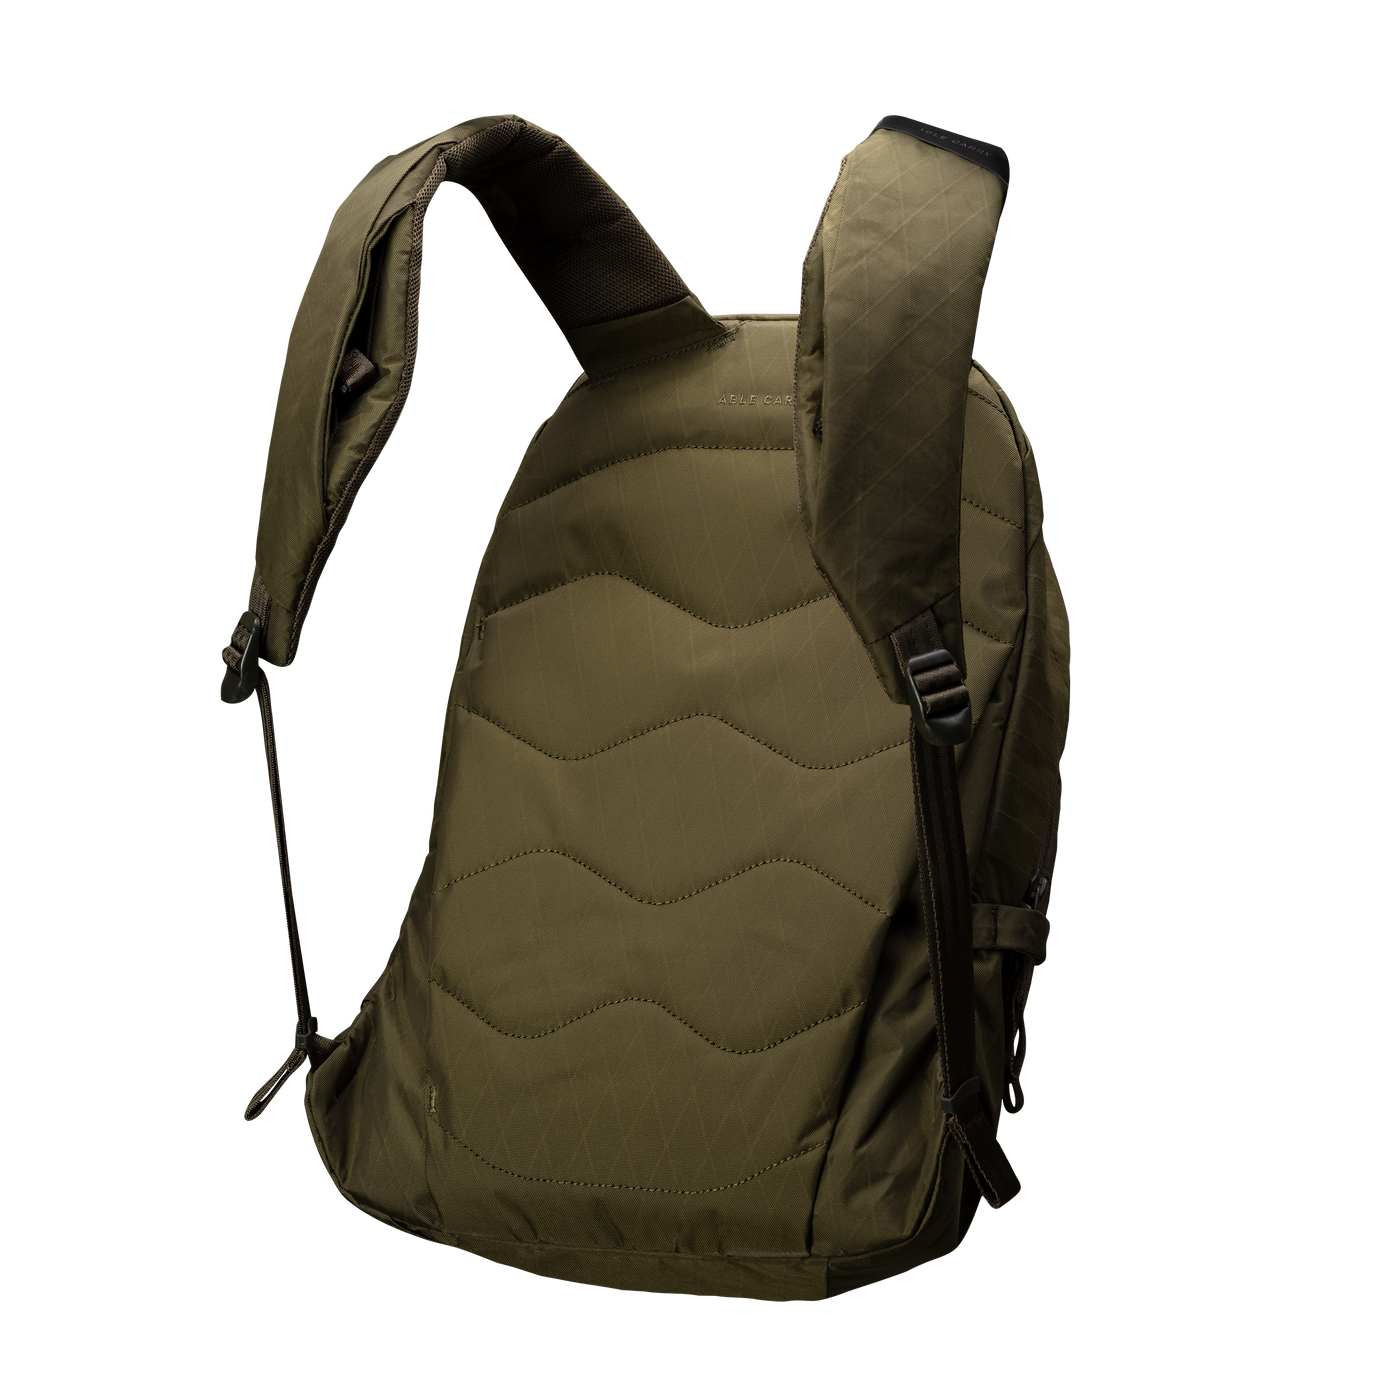 Able Carry - Thirteen Daybag